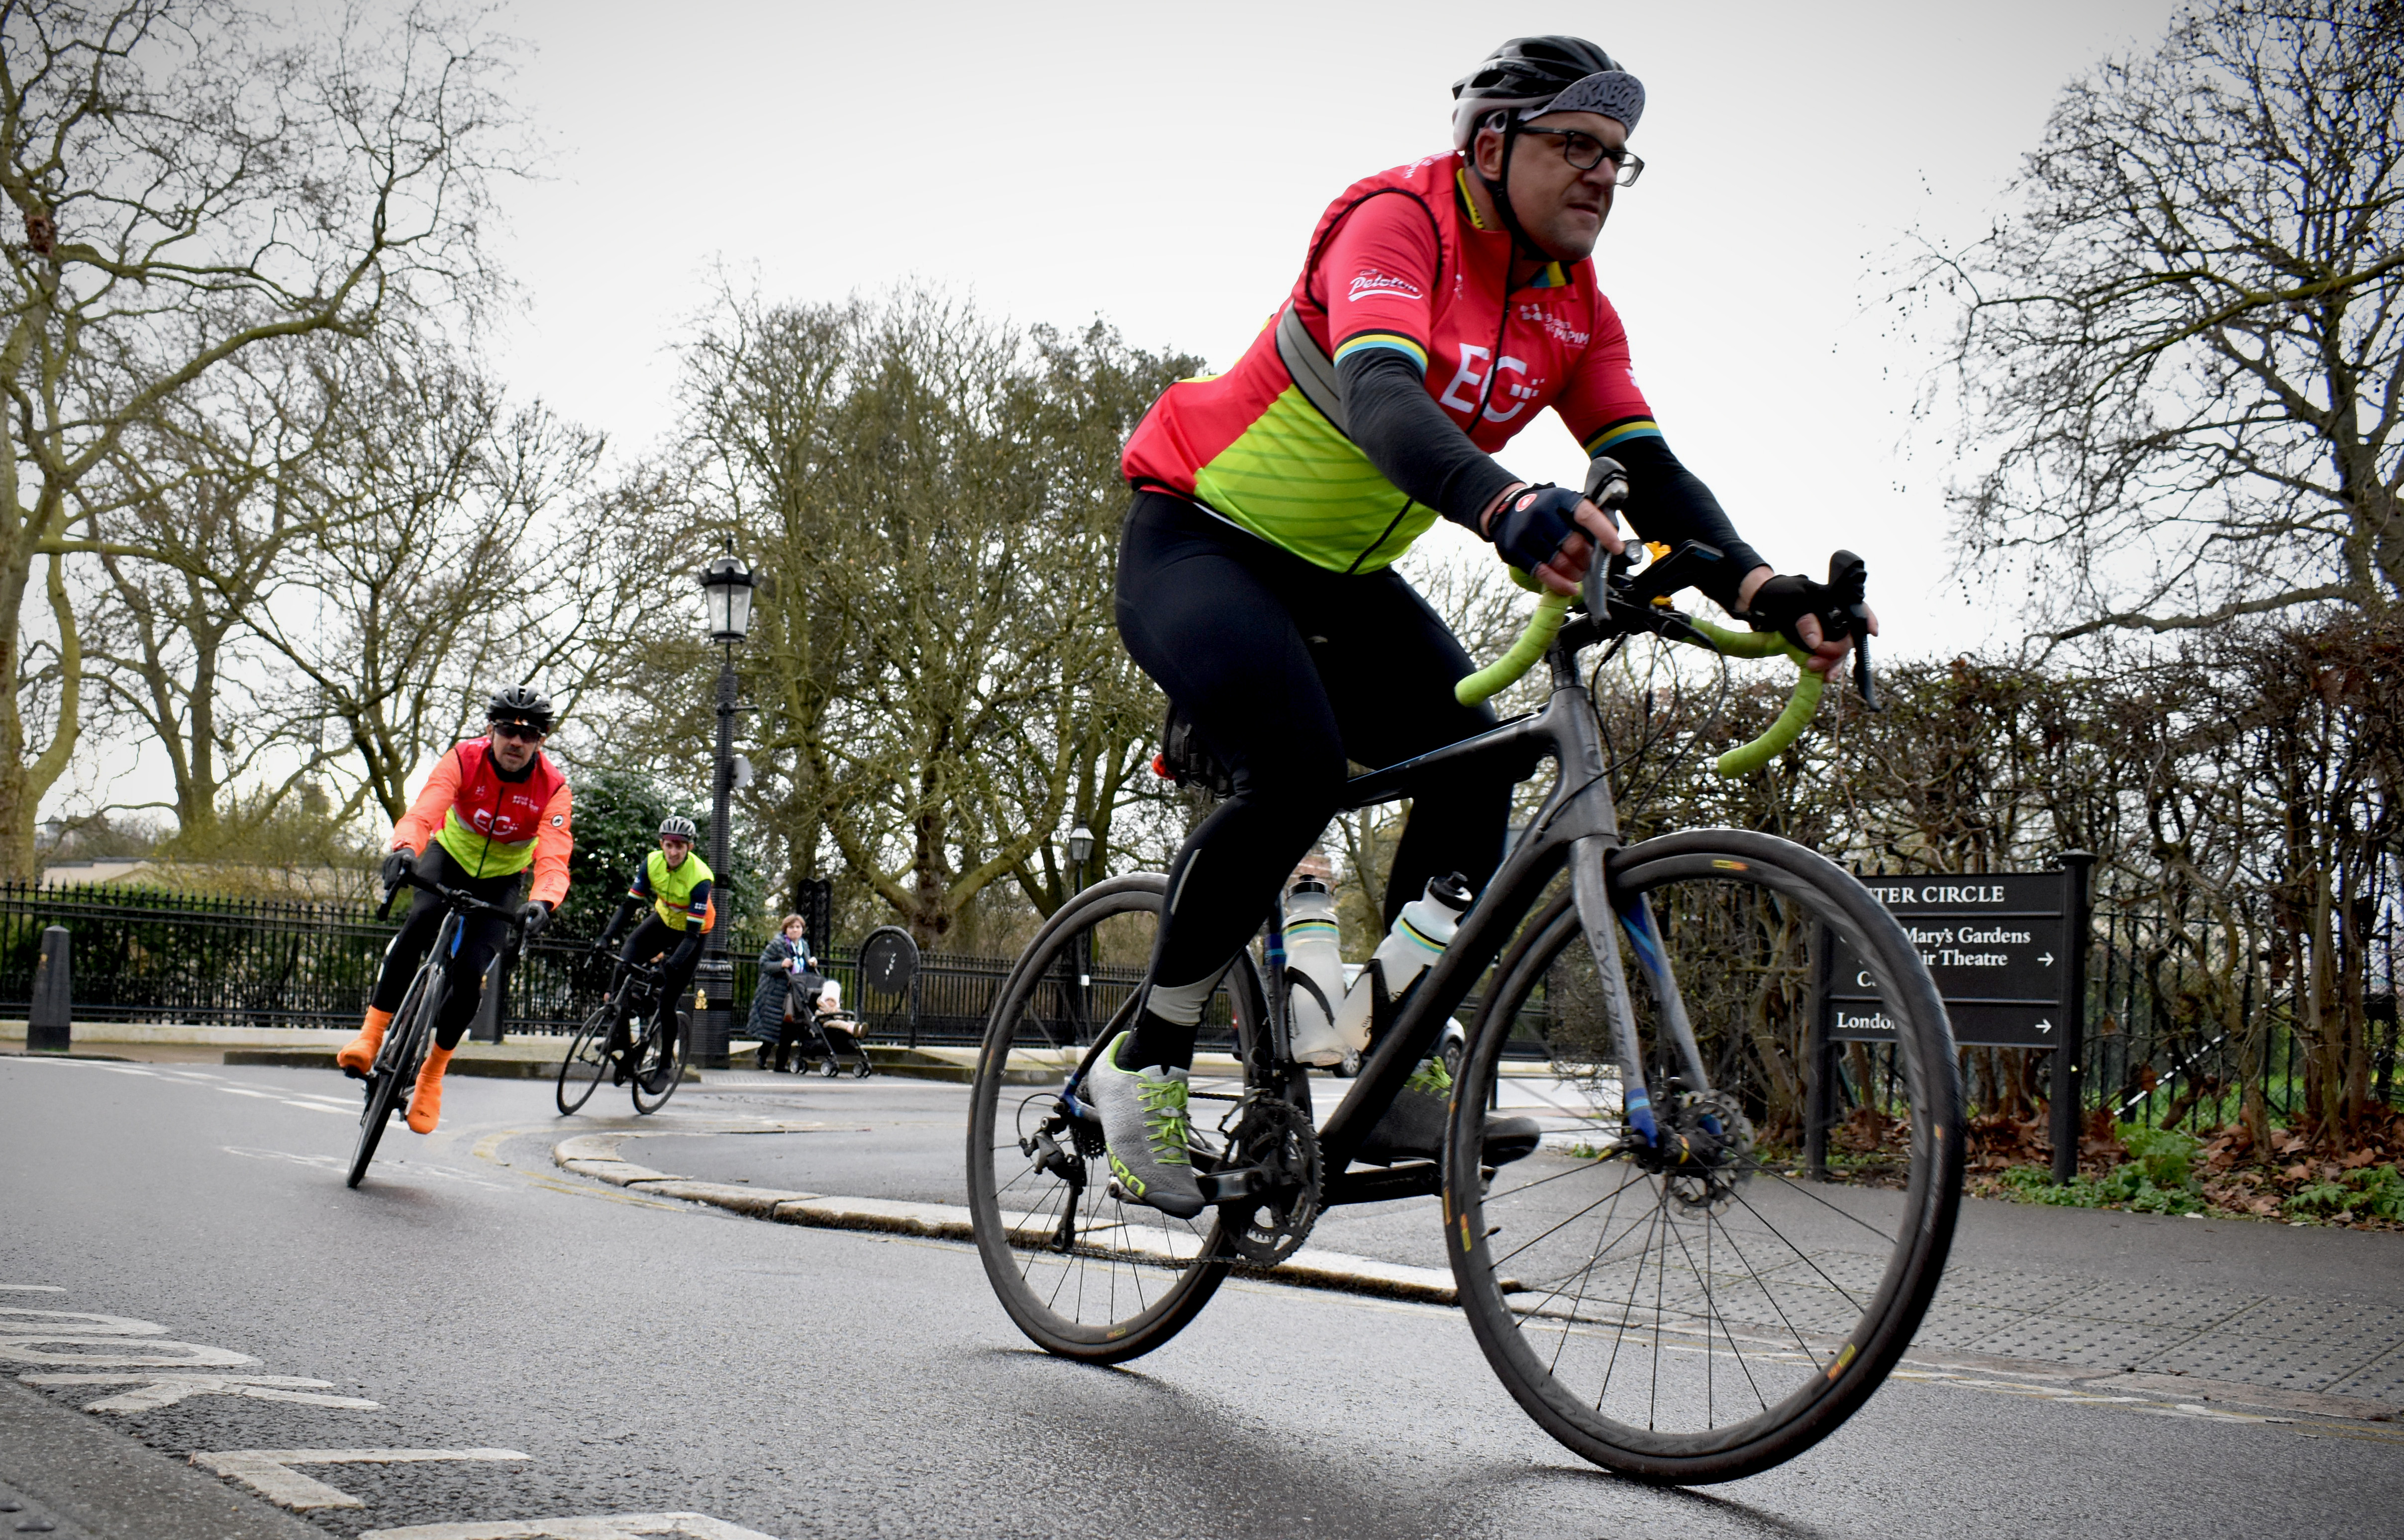 Cycling for Charity in Regents Park